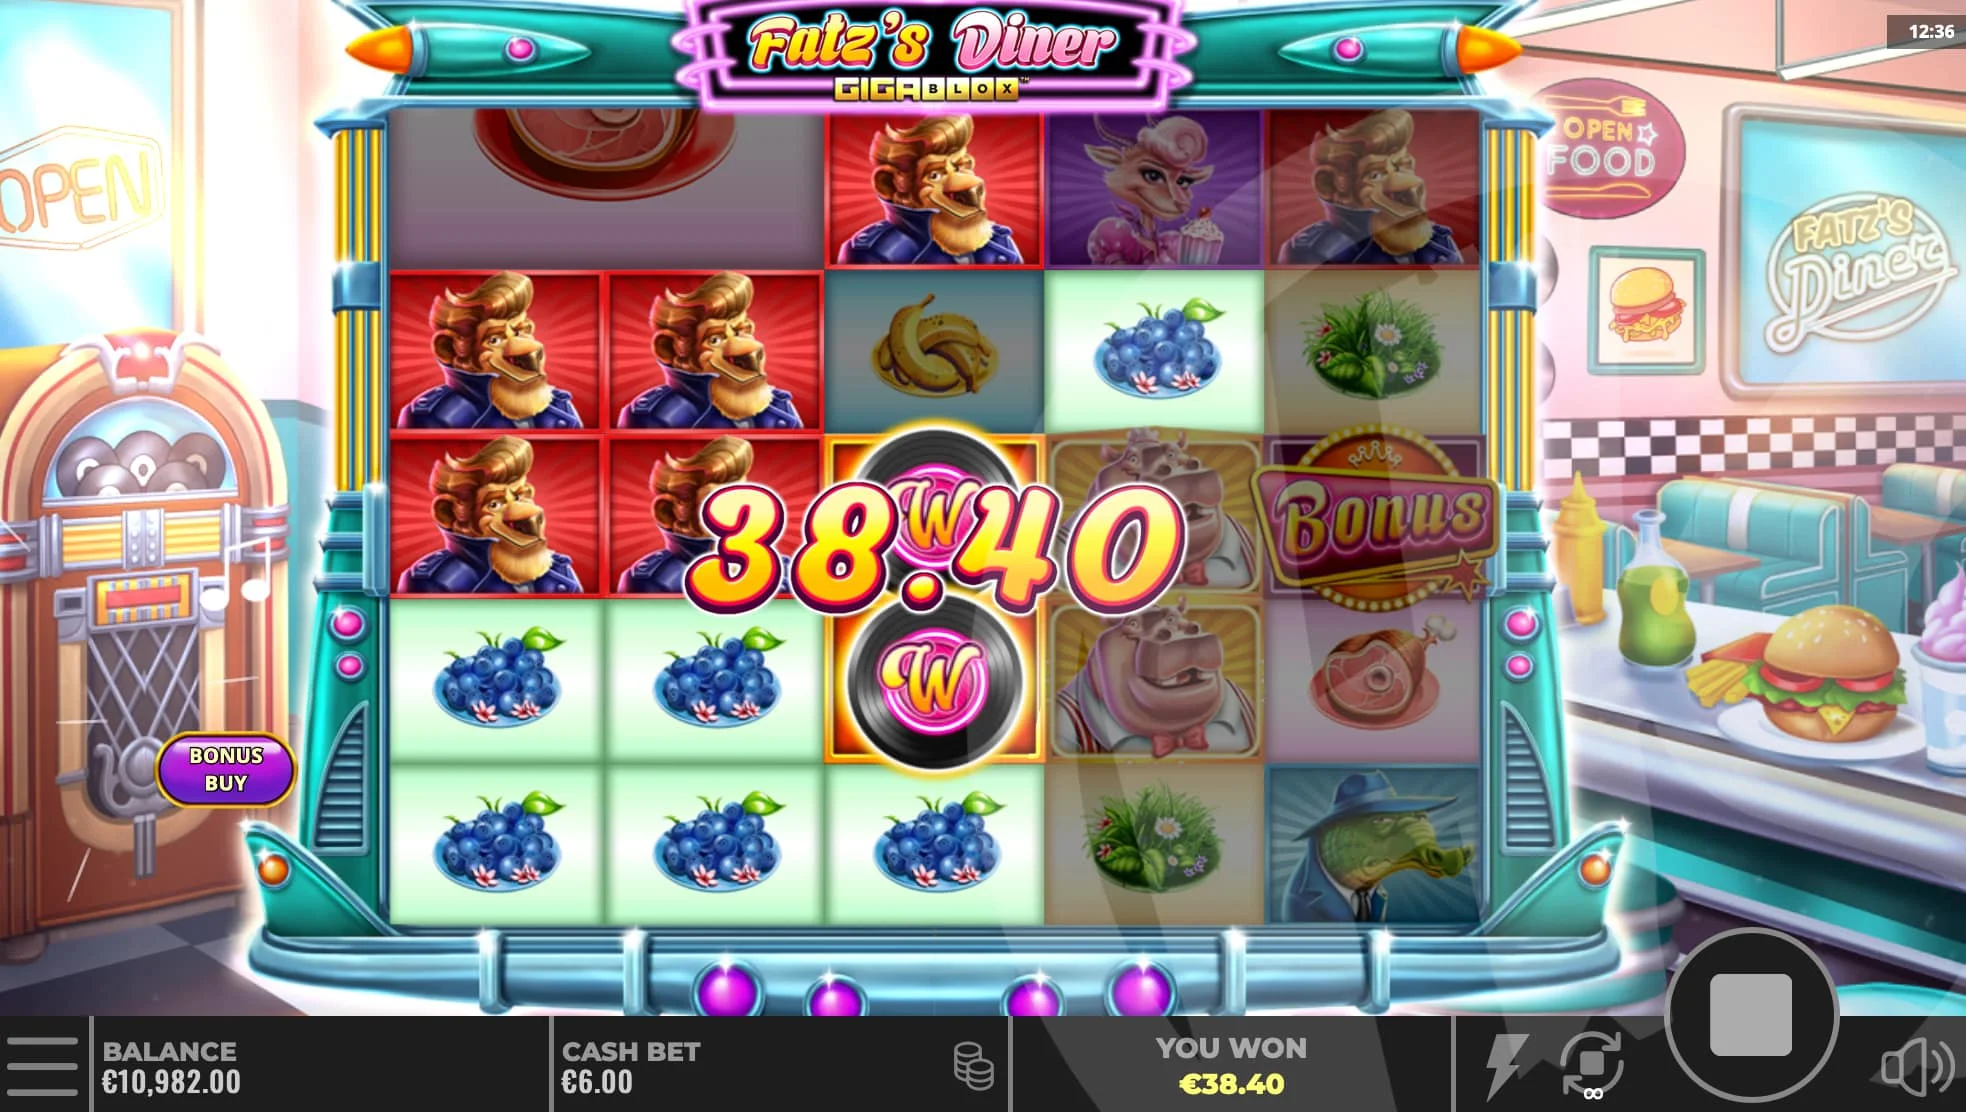 Fatz's Diner Gigablox Offers Players 40 Fixed Win Lines